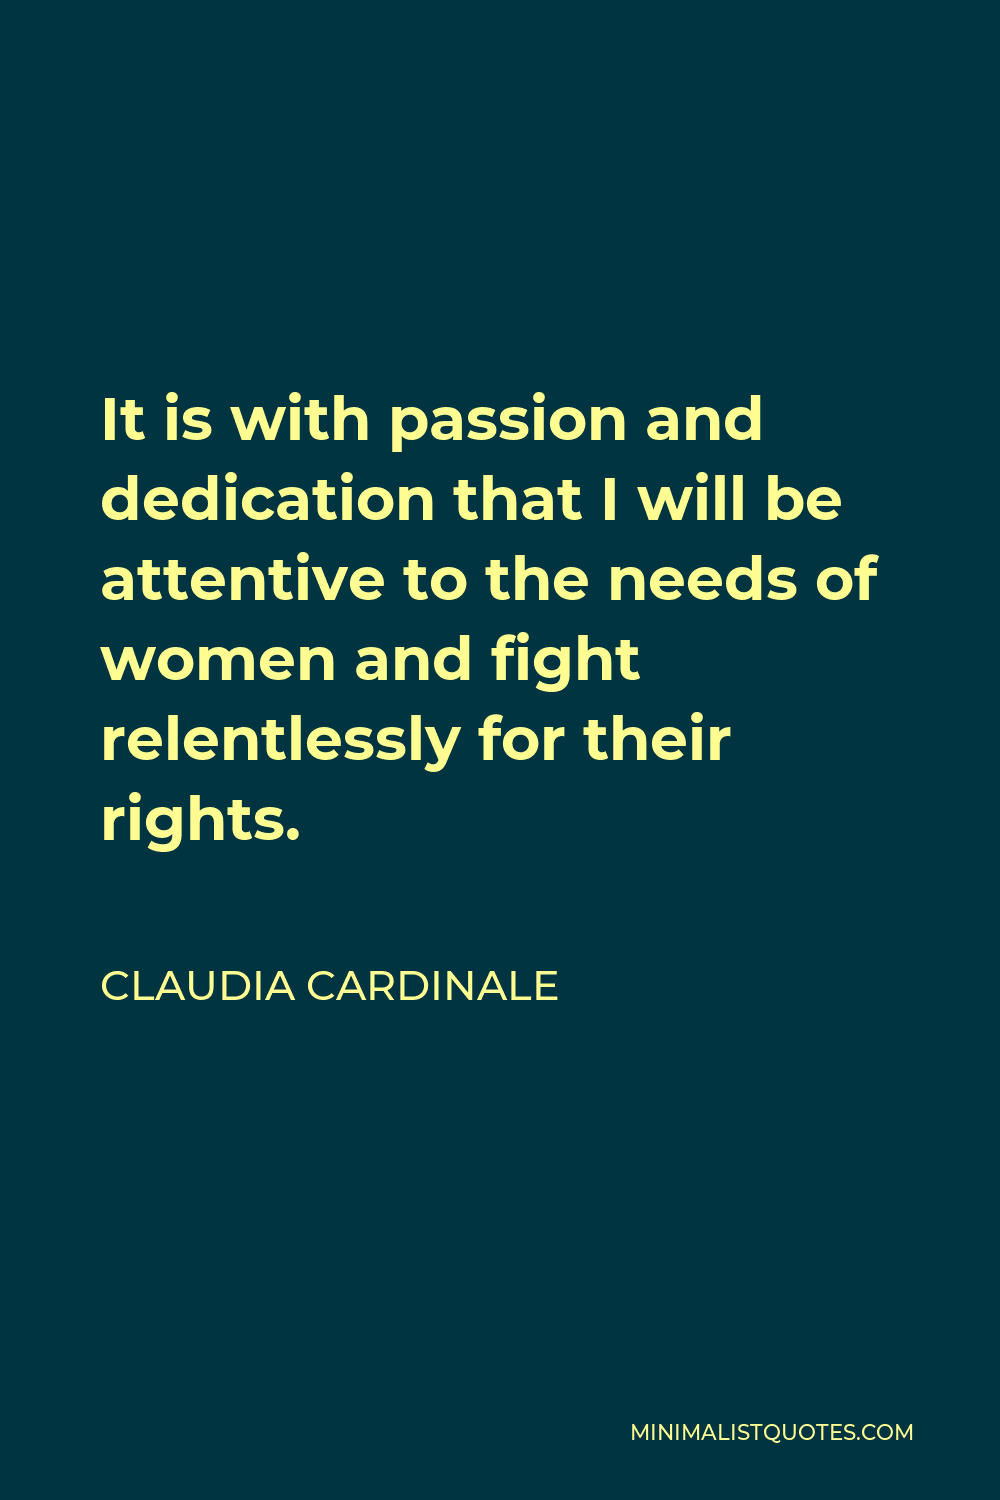 Claudia Cardinale Quote - It is with passion and dedication that I will be attentive to the needs of women and fight relentlessly for their rights.